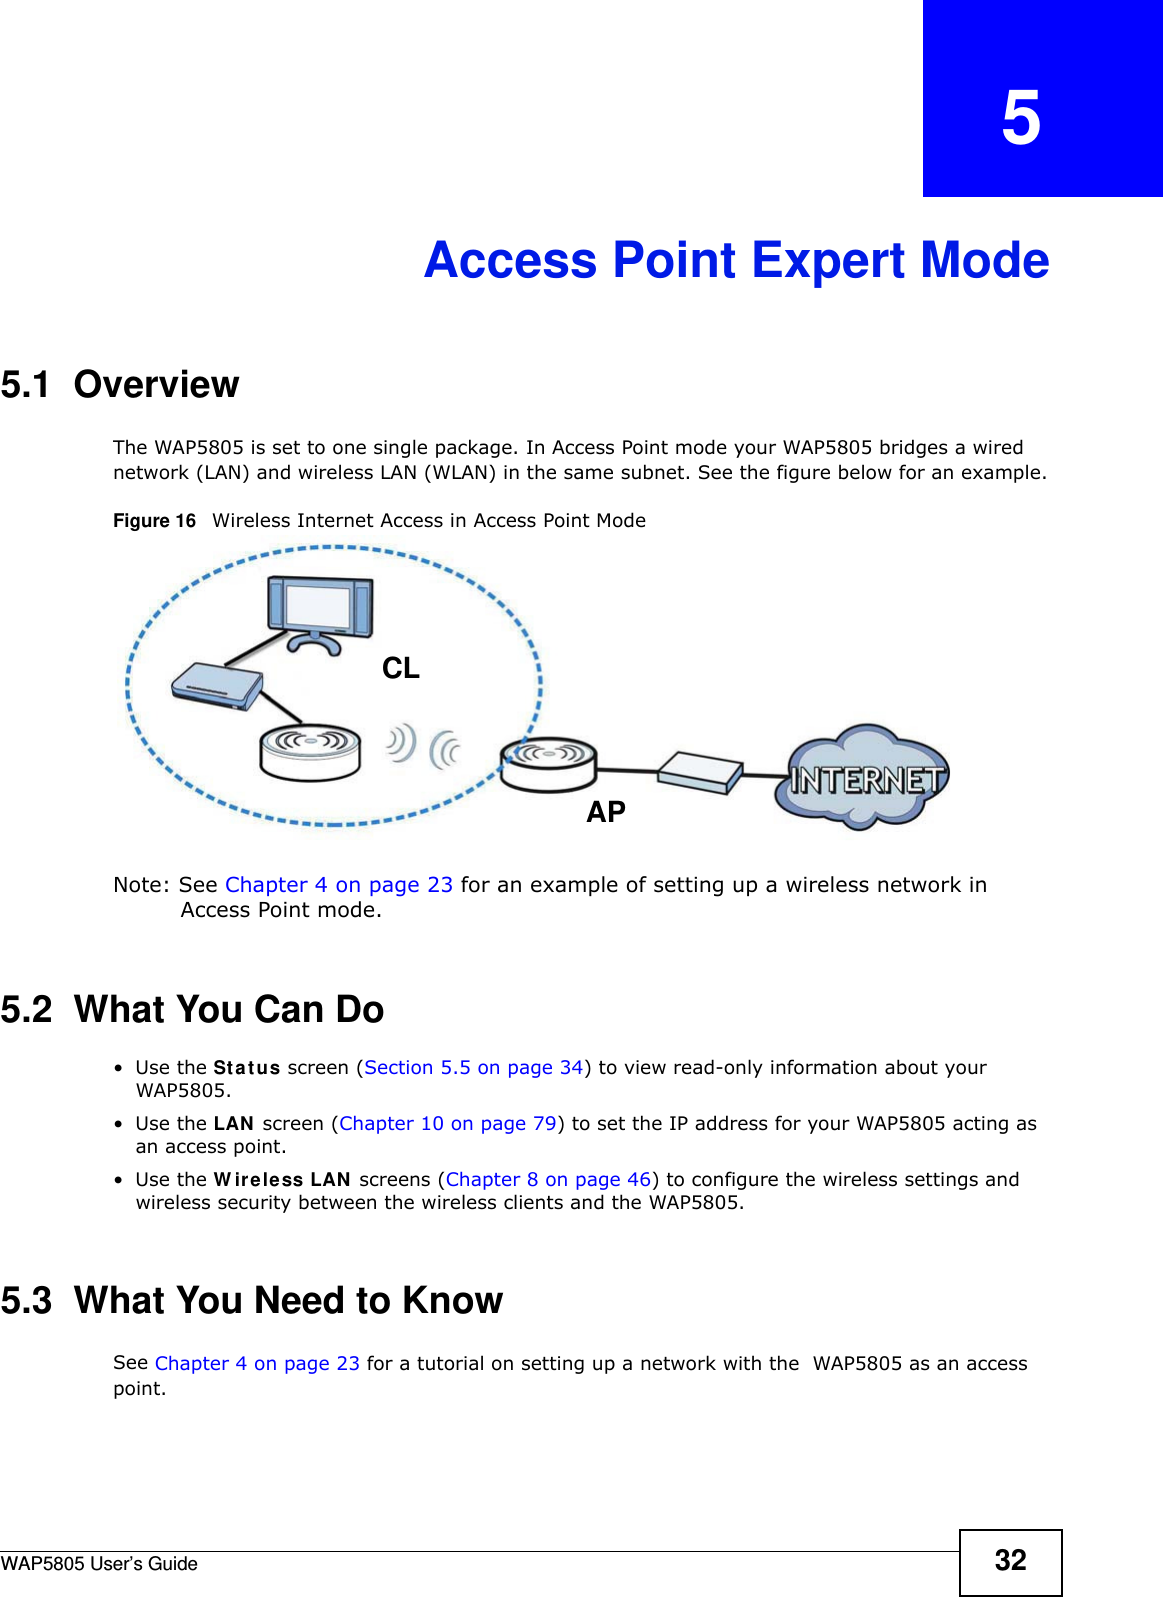 WAP5805 User’s Guide 32CHAPTER   5Access Point Expert Mode5.1  OverviewThe WAP5805 is set to one single package. In Access Point mode your WAP5805 bridges a wired network (LAN) and wireless LAN (WLAN) in the same subnet. See the figure below for an example.Figure 16   Wireless Internet Access in Access Point Mode Note: See Chapter 4 on page 23 for an example of setting up a wireless network in Access Point mode. 5.2  What You Can Do•Use the Status screen (Section 5.5 on page 34) to view read-only information about your WAP5805.•Use the LAN screen (Chapter 10 on page 79) to set the IP address for your WAP5805 acting as an access point.•Use the Wireless LAN screens (Chapter 8 on page 46) to configure the wireless settings and wireless security between the wireless clients and the WAP5805.5.3  What You Need to KnowSee Chapter 4 on page 23 for a tutorial on setting up a network with the  WAP5805 as an access point.CLAP